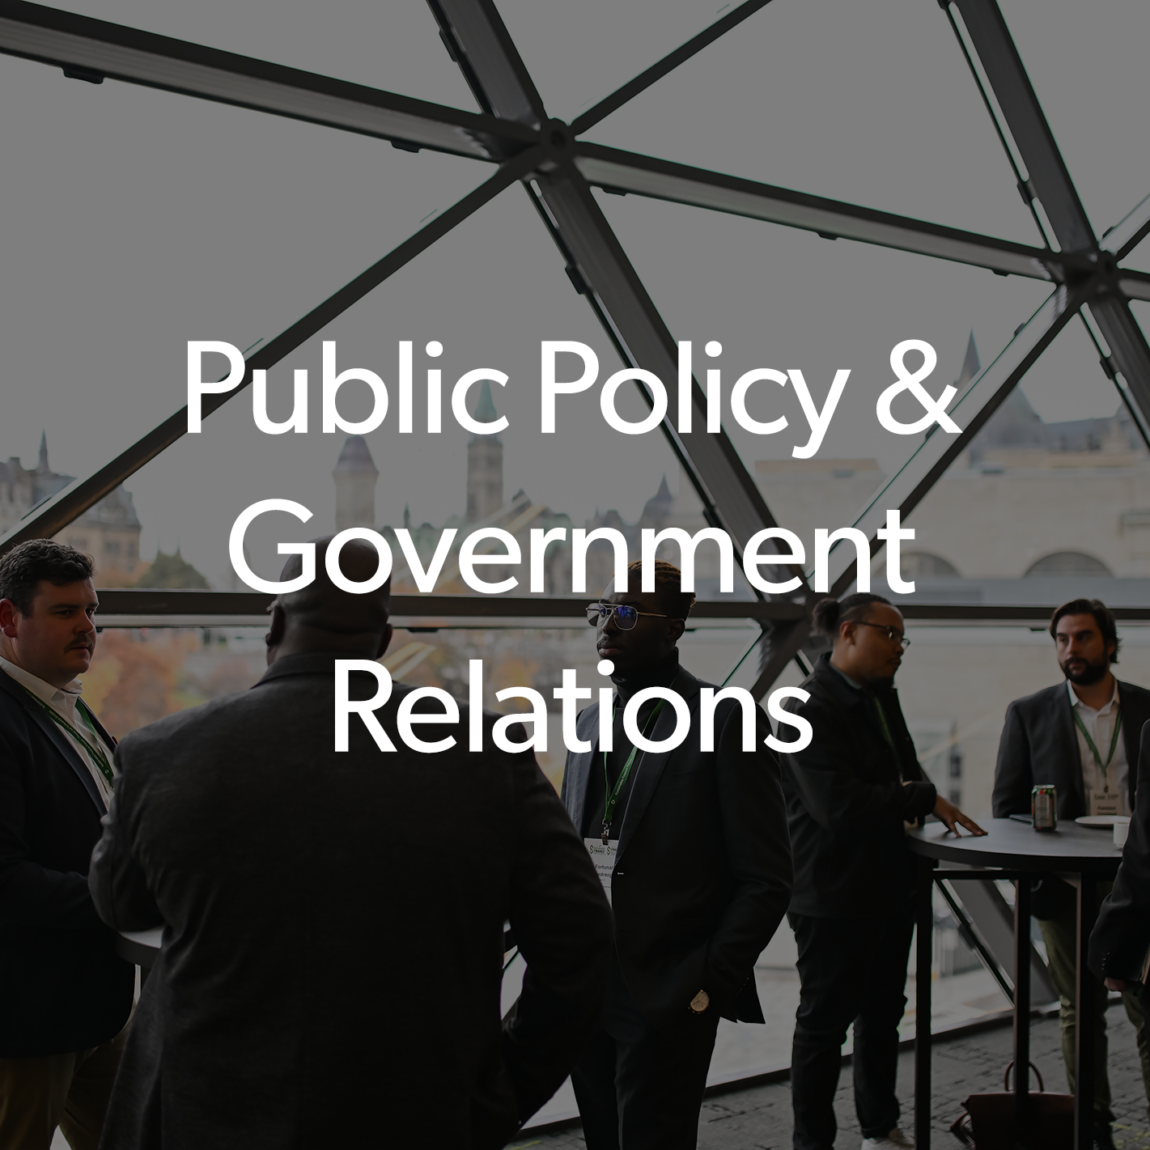 Public Policy & Government Relations